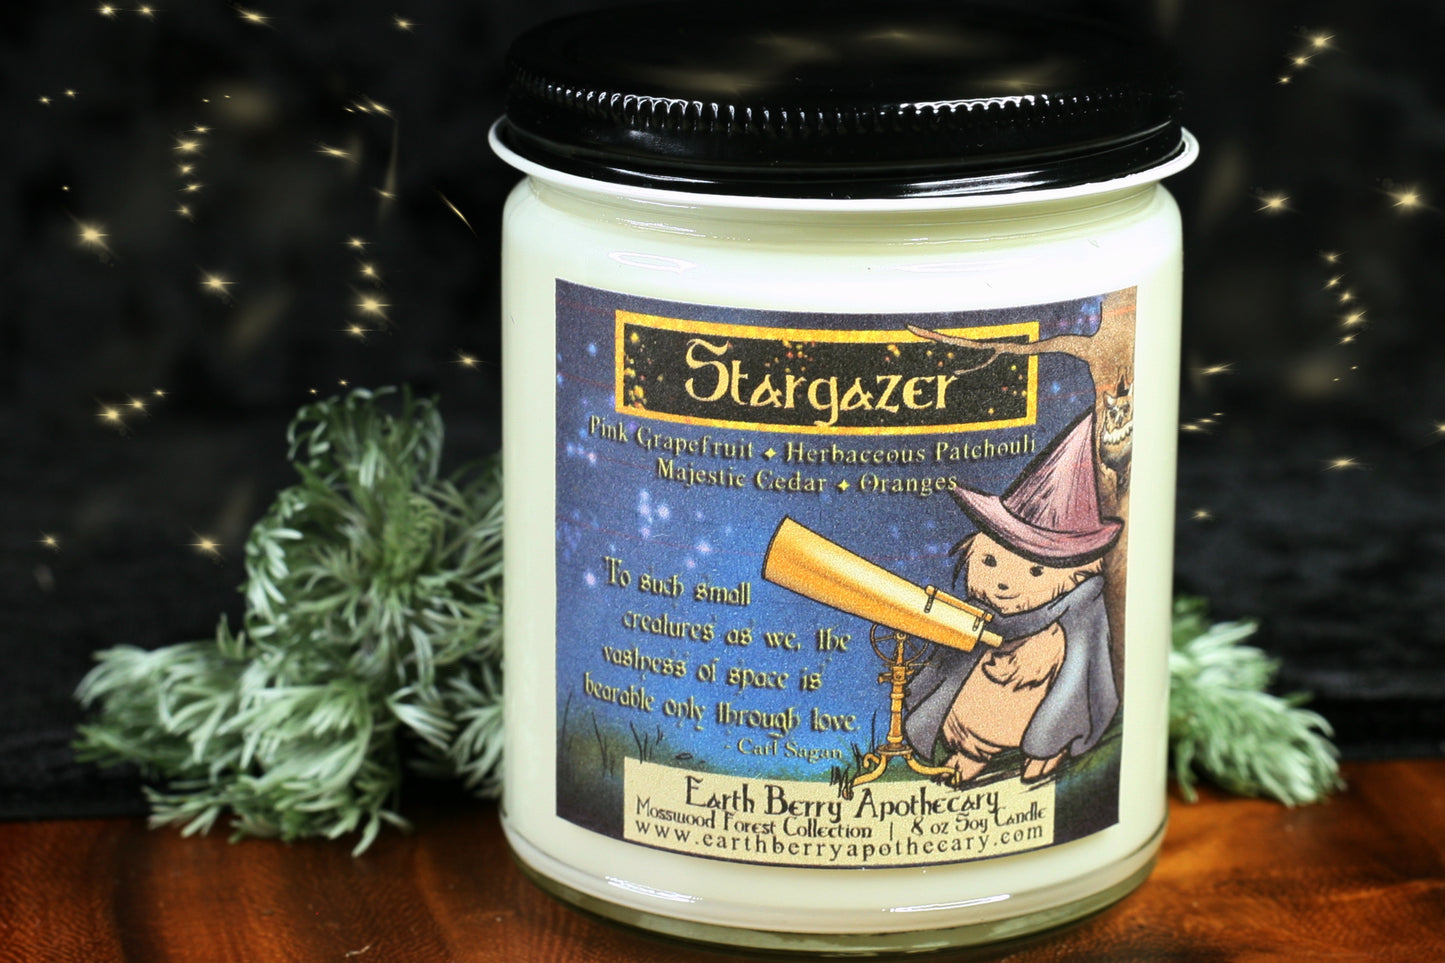 Stargazer soy candle with the hedge witch using an old telescope. An owl sits in a tree hollow. The scent is grapefruit and patchouli 